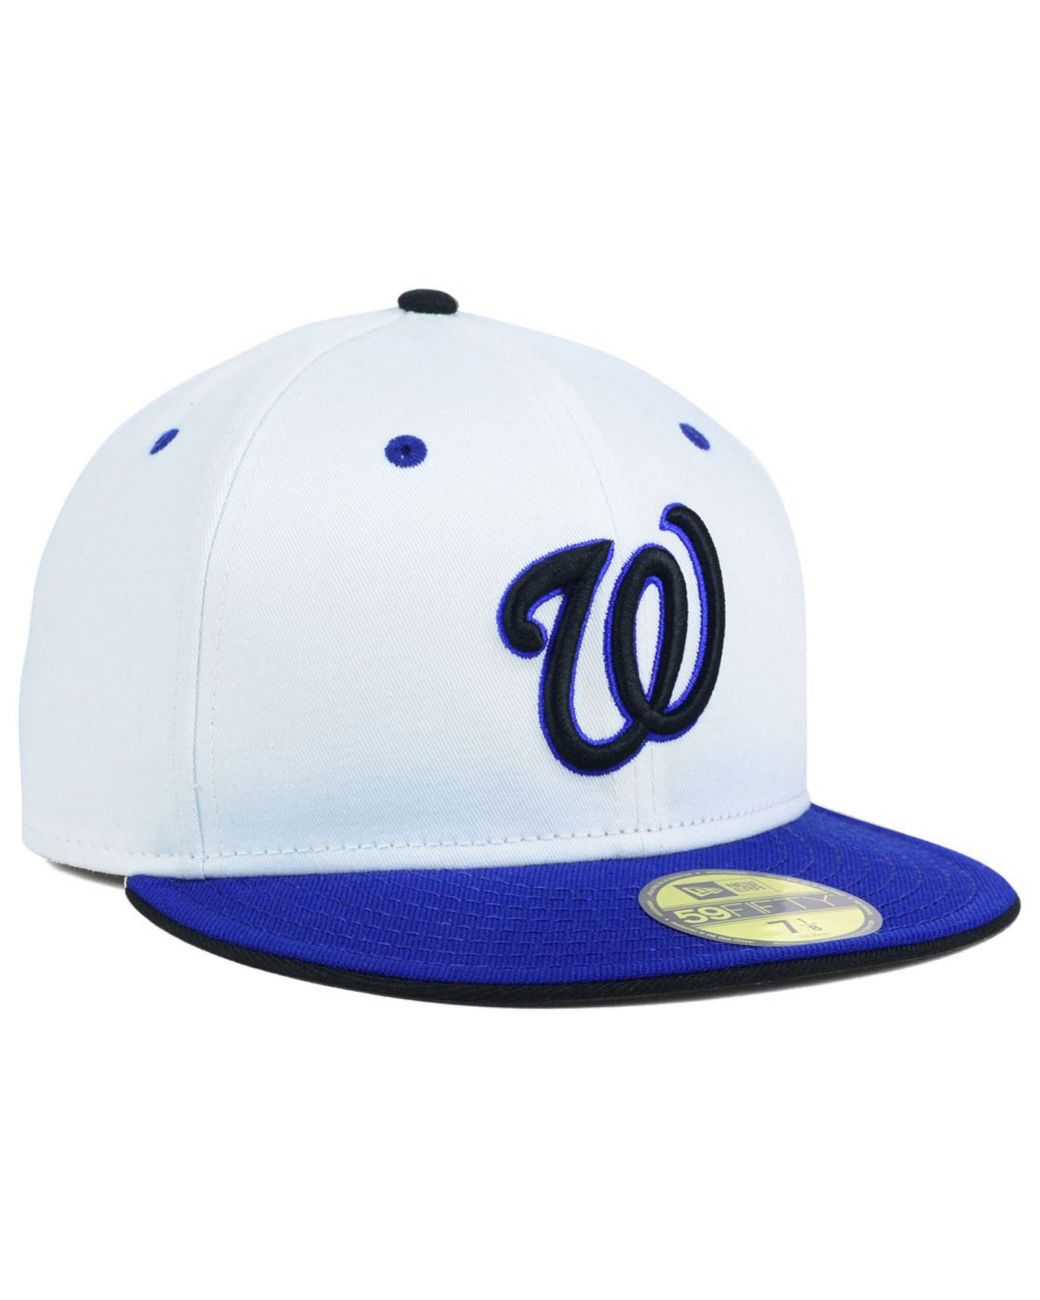 Men's Washington Nationals New Era White/Navy Alternate 2020 Authentic  Collection On-Field Low Profile Fitted Hat